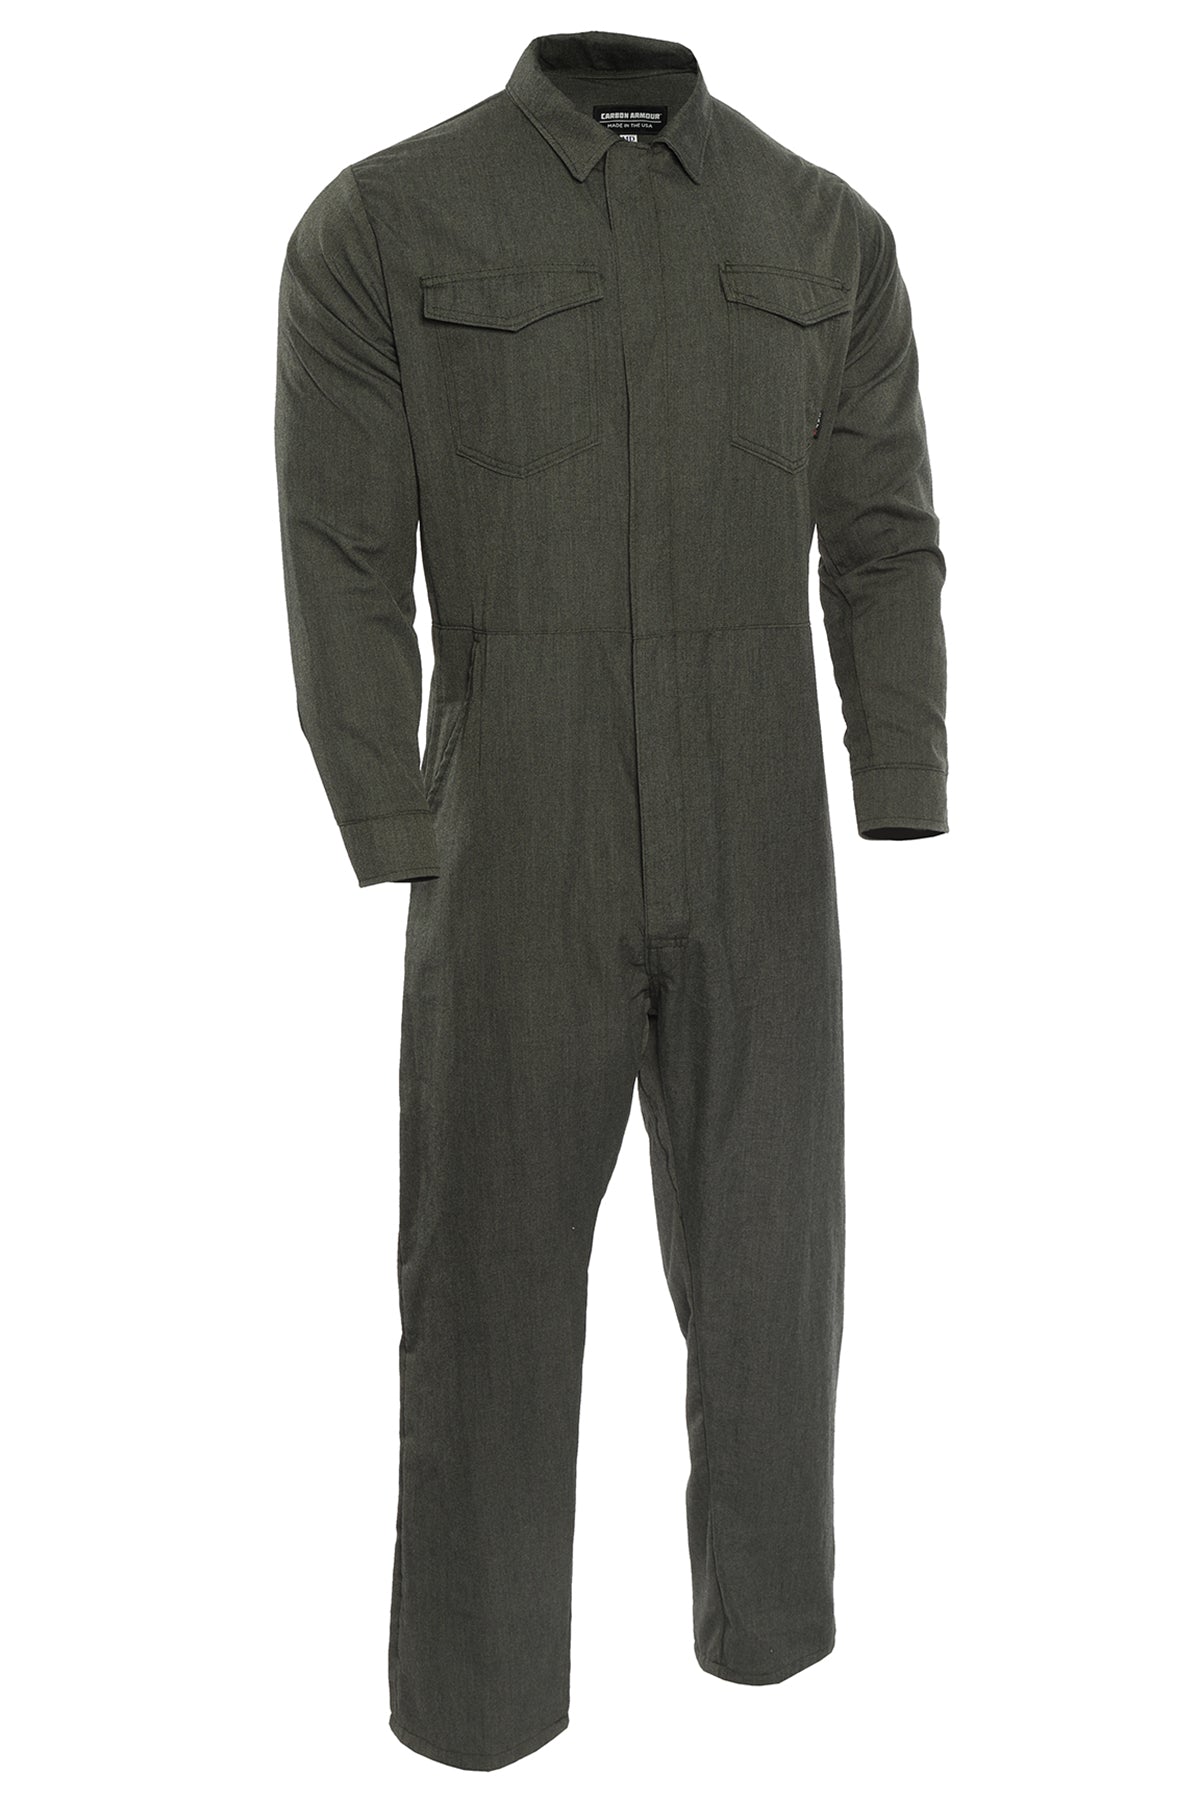 CARBON ARMOUR Coverall